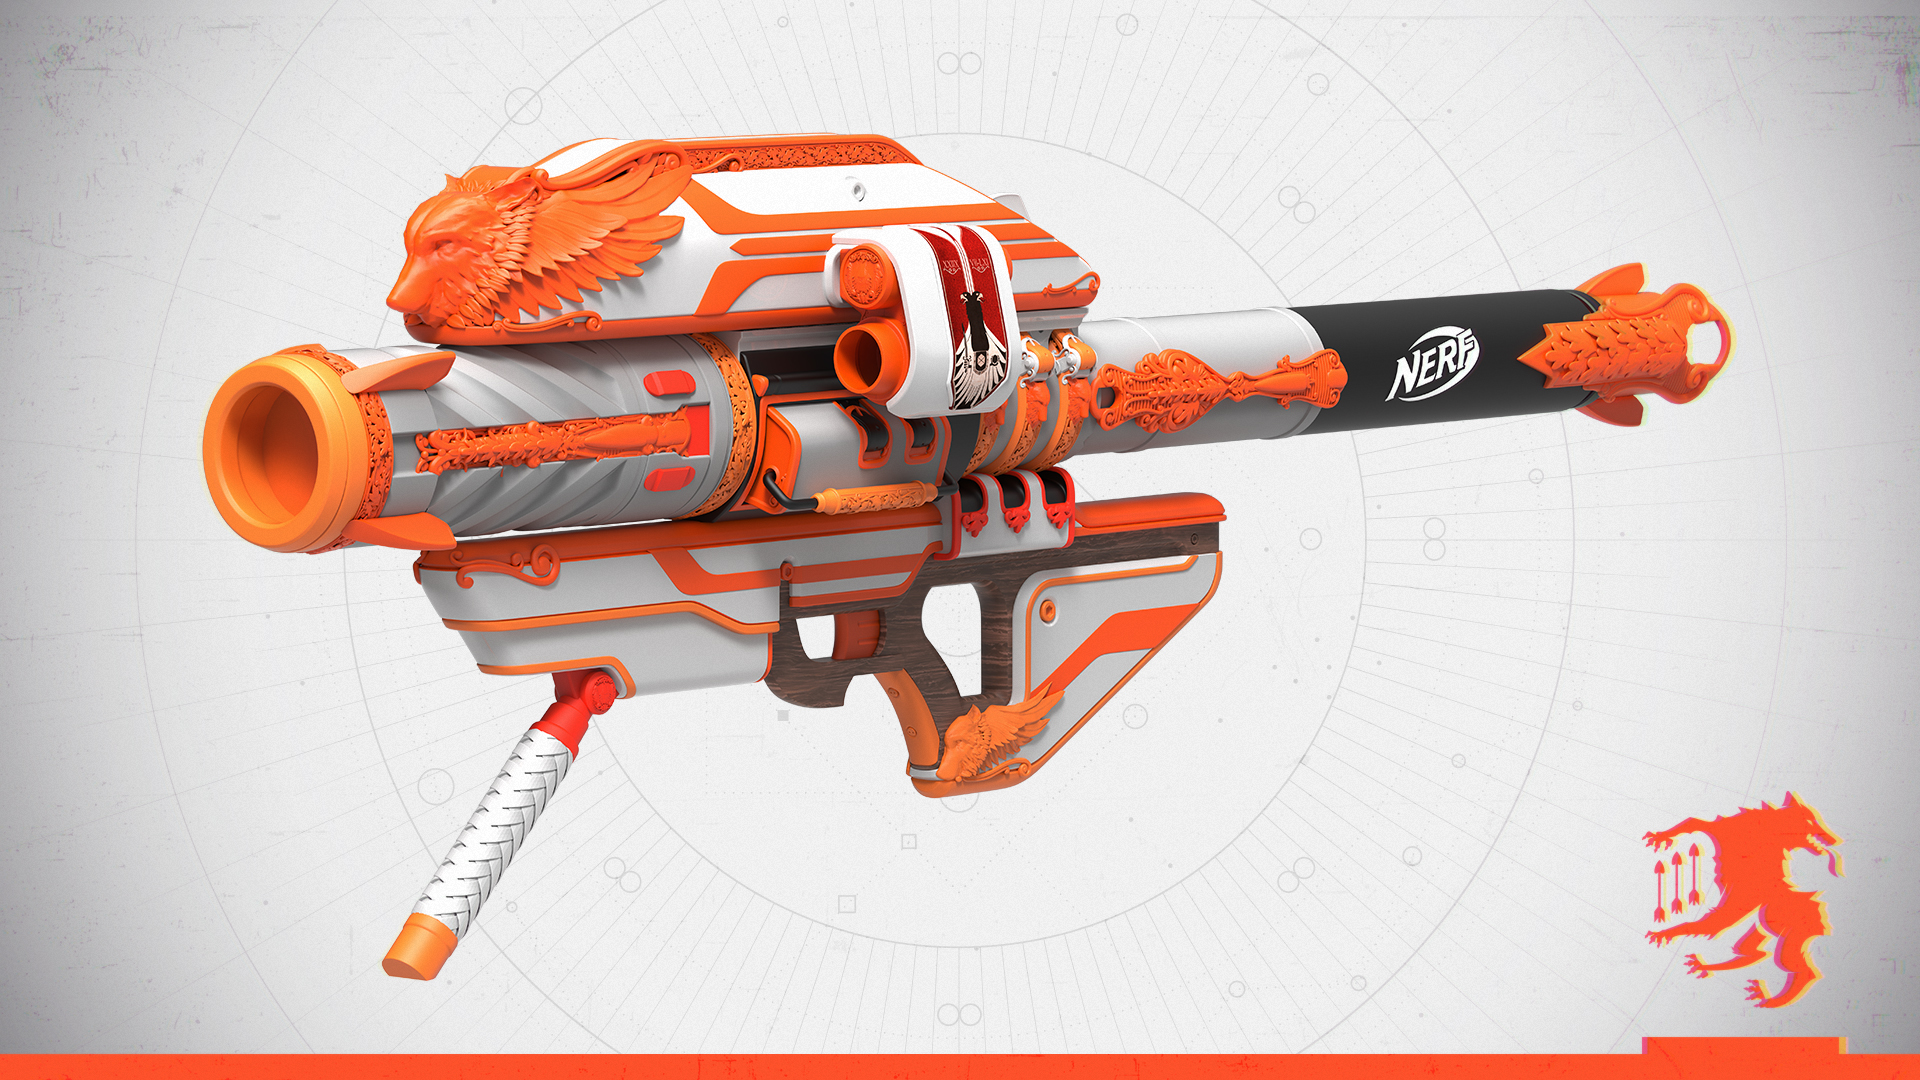 Destiny Bulletin on Twitter: "NEW: Bungie Rewards Nerf LMTD Destiny  Gjallarhorn Blaster | #Destiny2 "Destiny 2 players who acquire Gjallarhorn  in the Bungie 30th Anniversary Pack will have early access to the